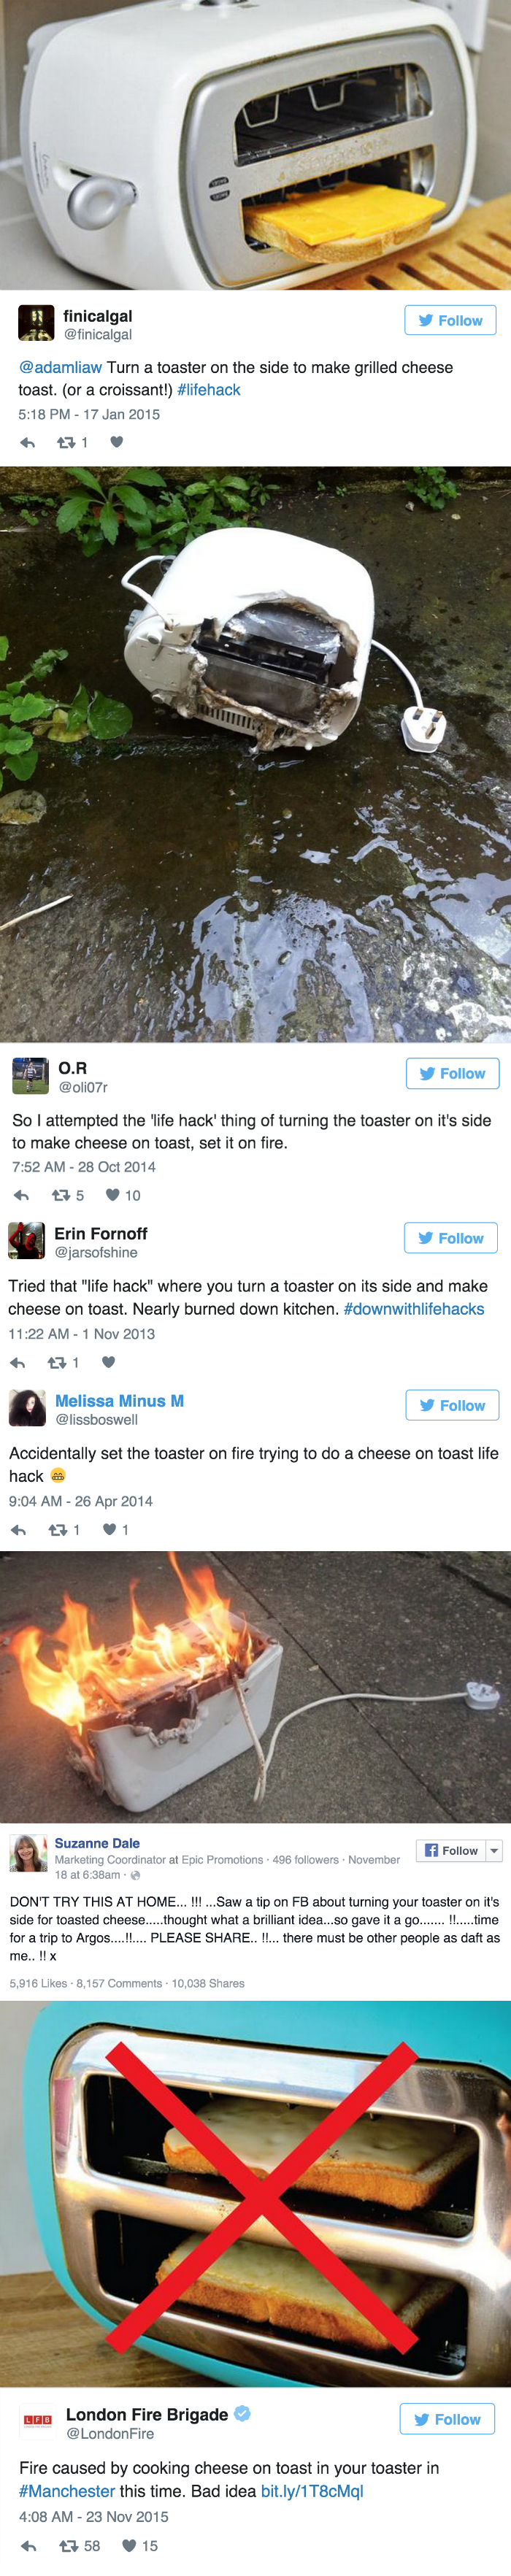 funny fail tweet london fire brigrade tweets this grilled cheese life hack is toast